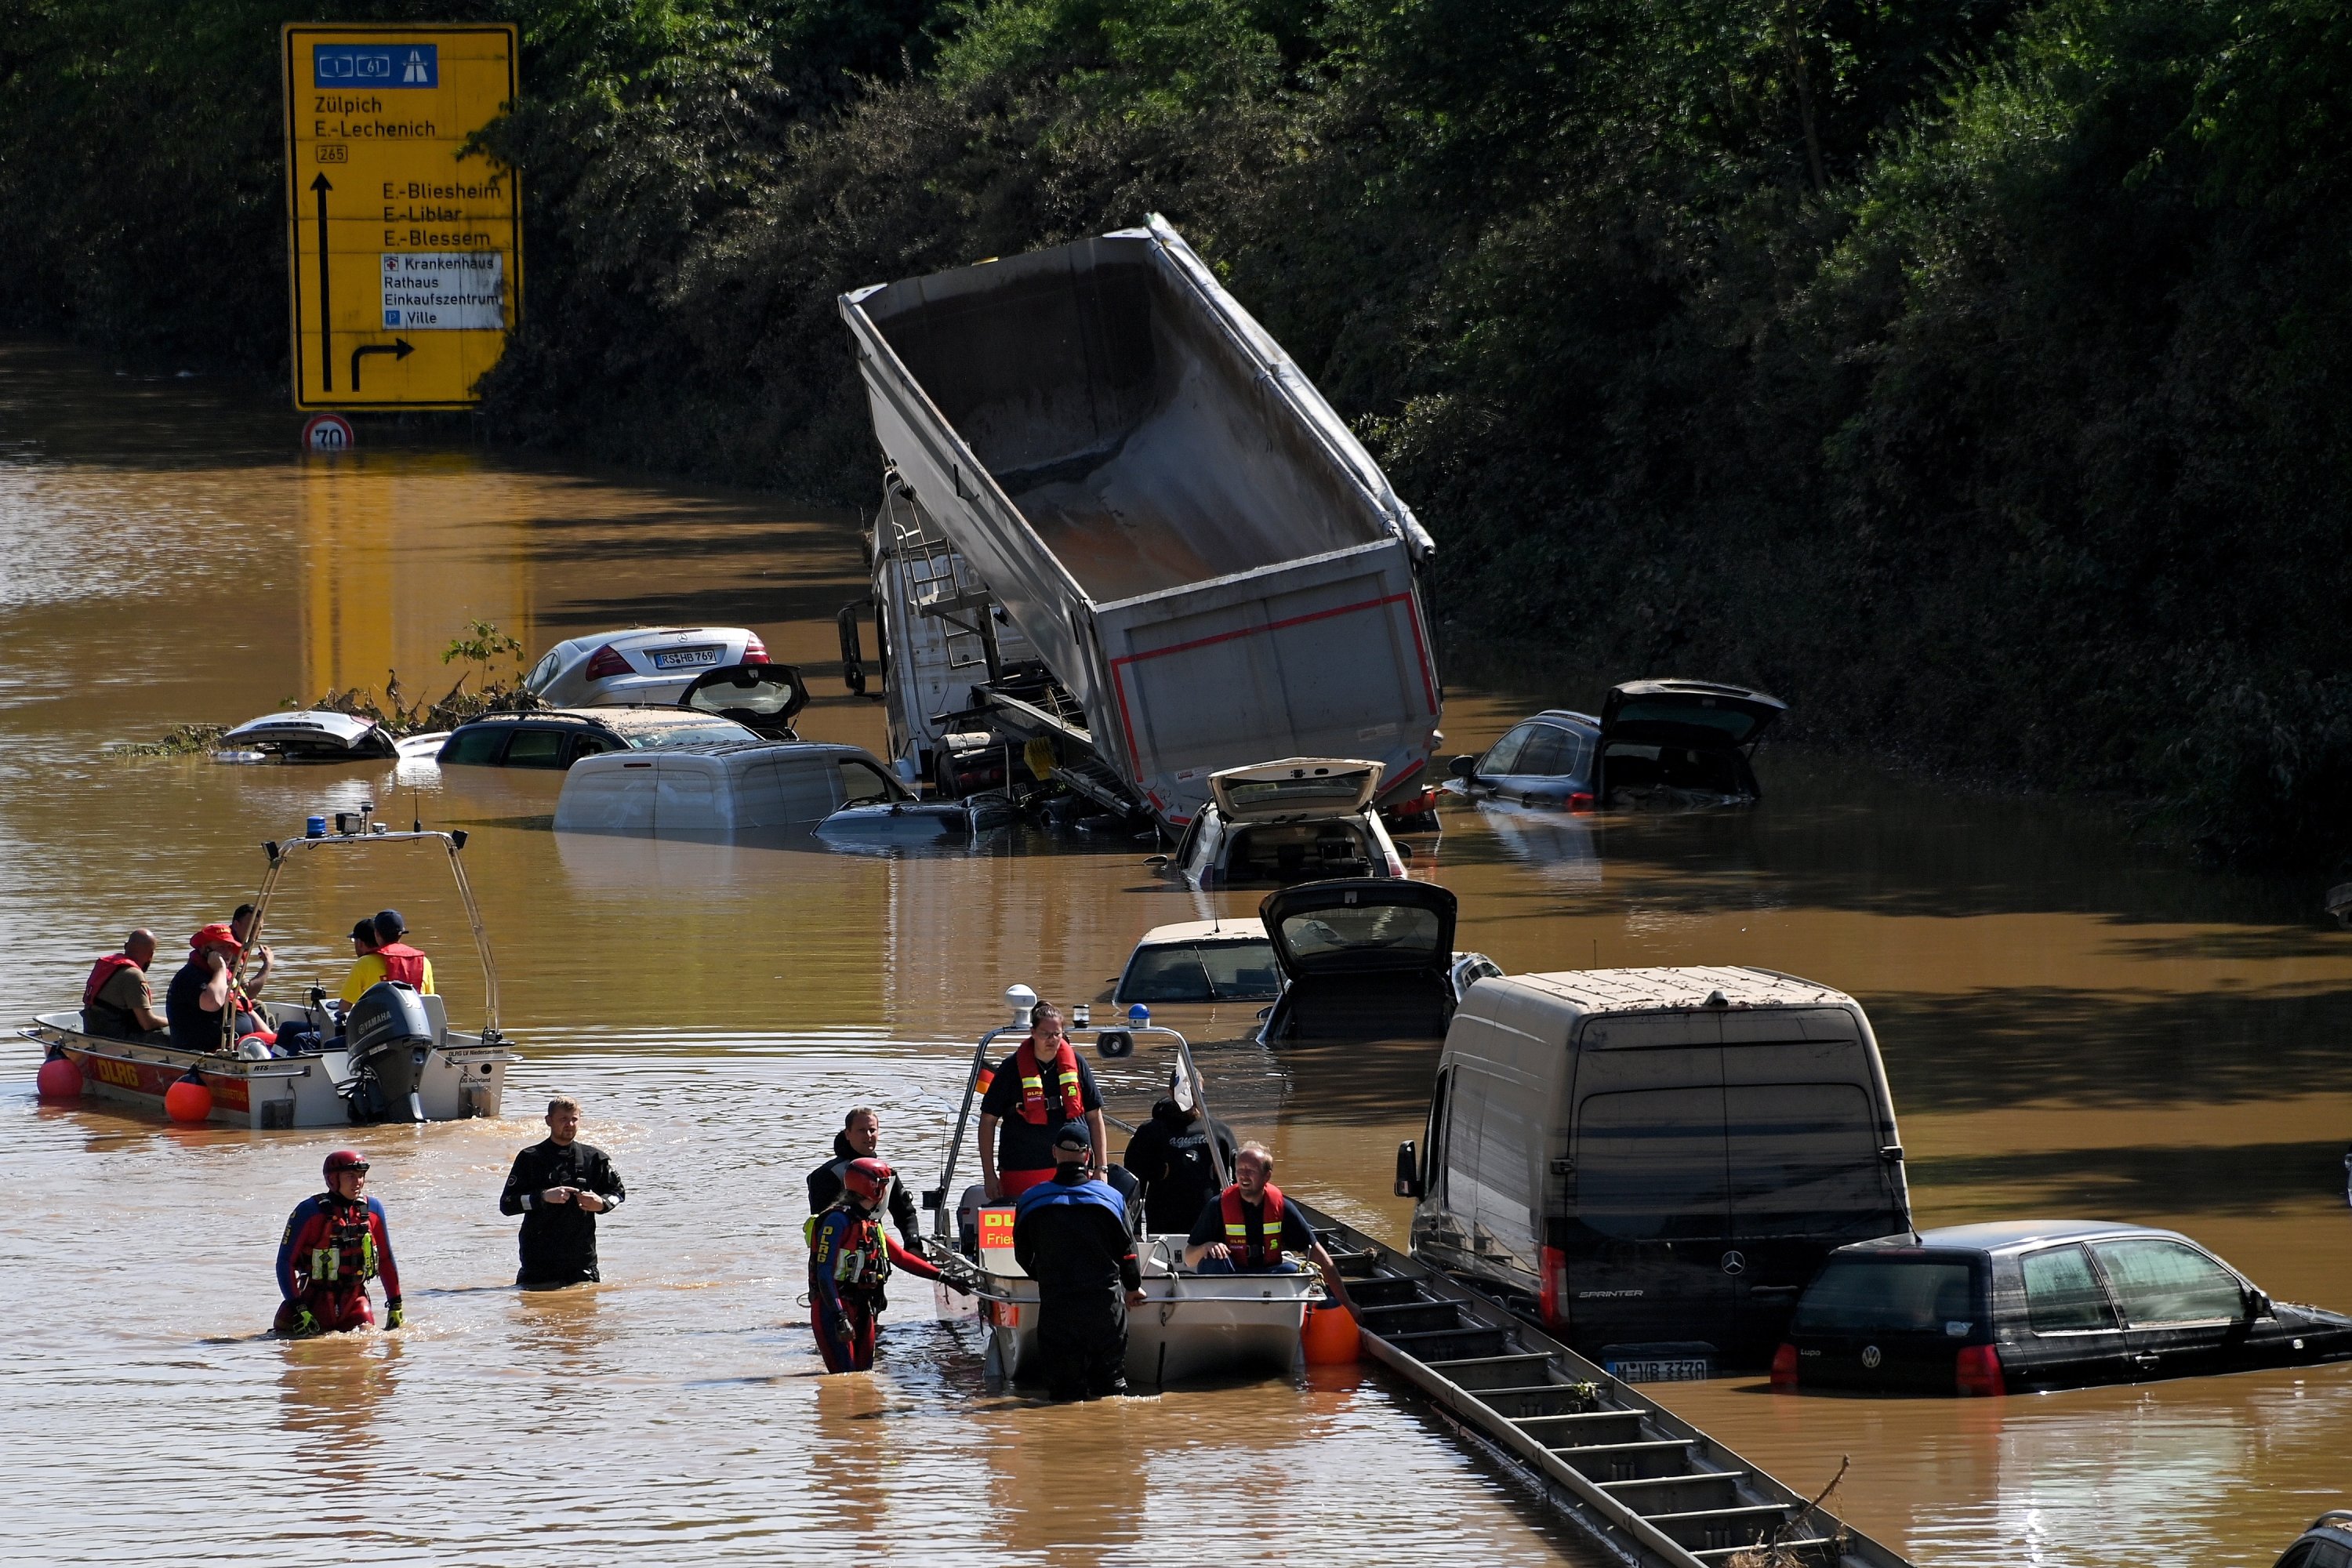 Rescue services clear wrecked cars and trucks from the B265 federal highway in Erftstadt, Germany, July 17, 2021. (EPA Photo)